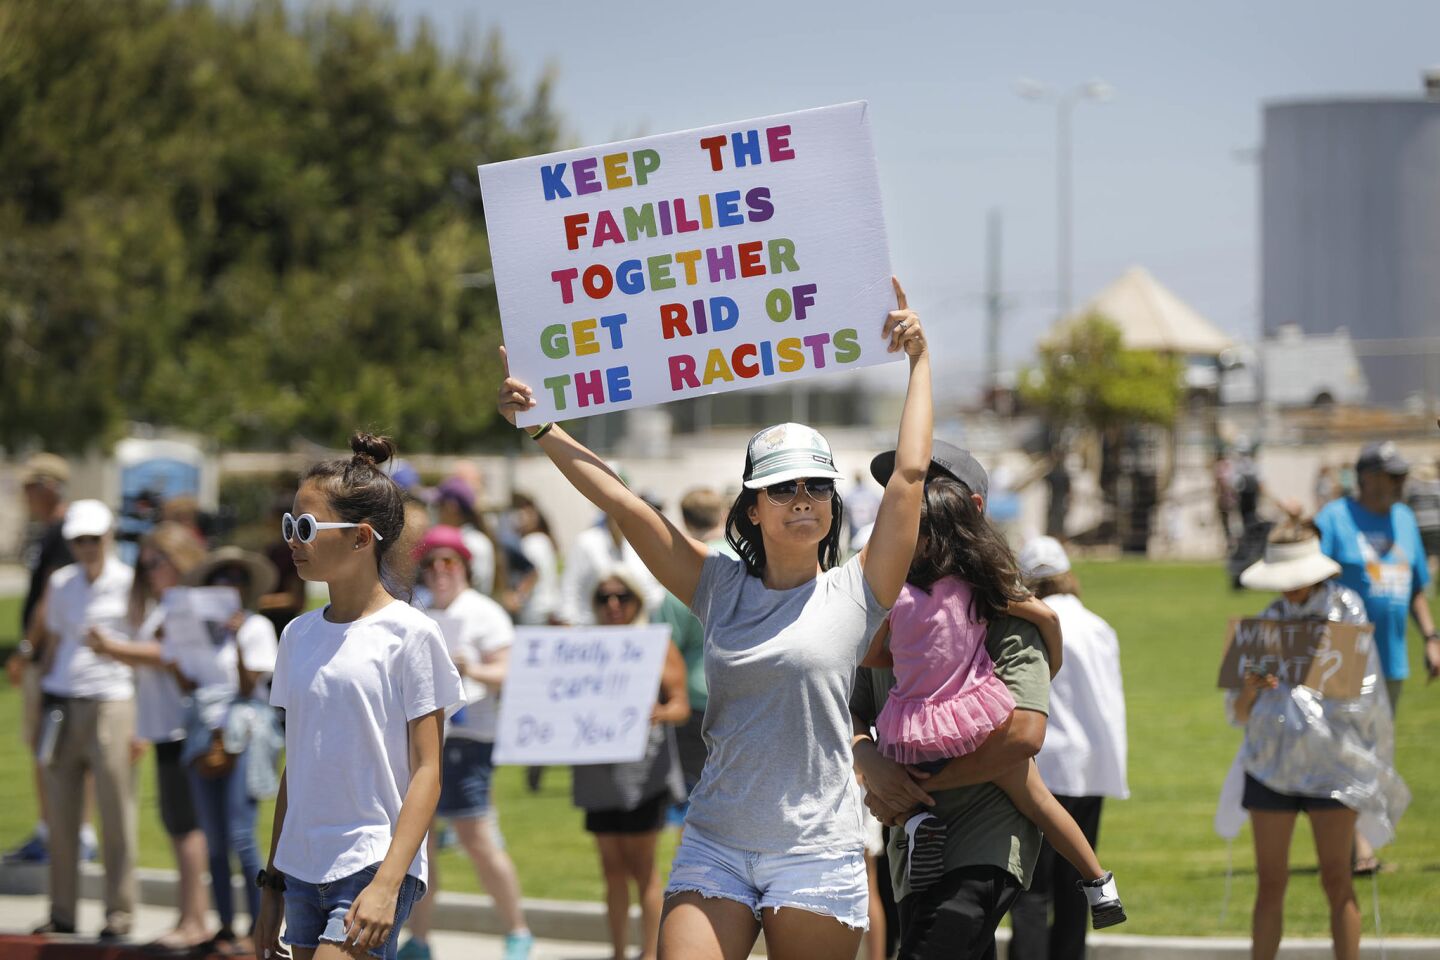 Families Belong Together Carlsbad rally